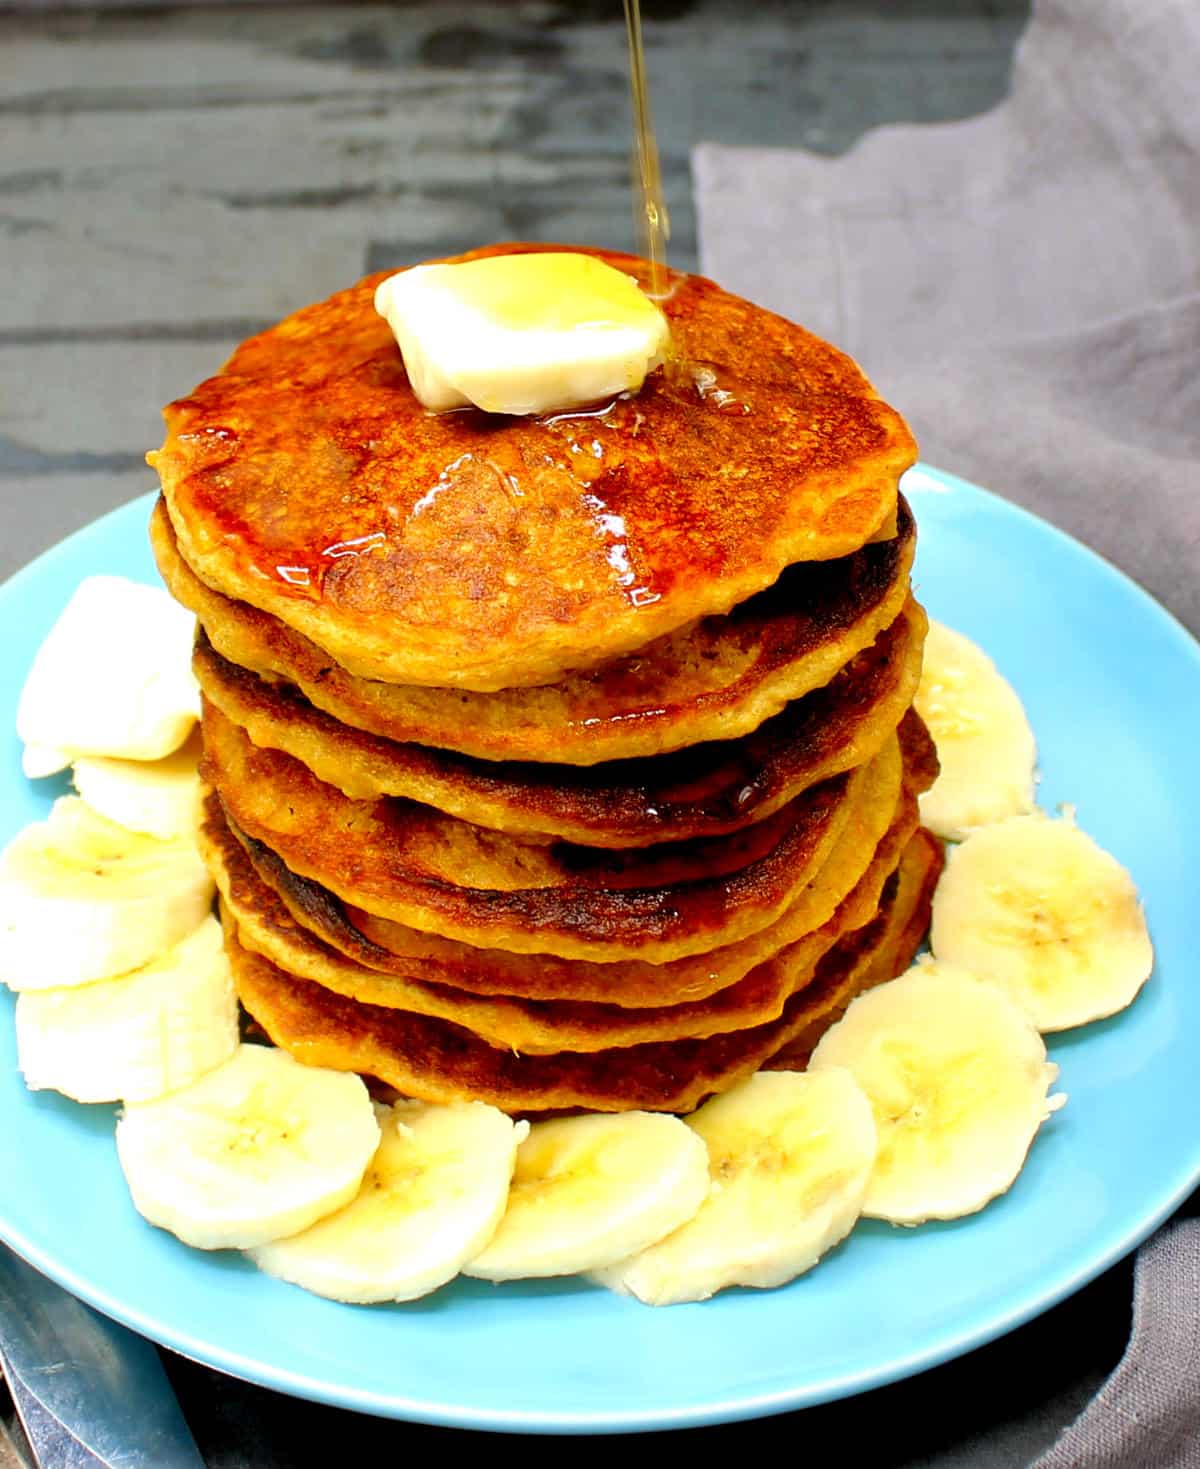 Vegan sweet potato pancakes in stack on blue plate surrounded by sliced bananas, with a pat of vegan butter on top and maple syrup poured over.